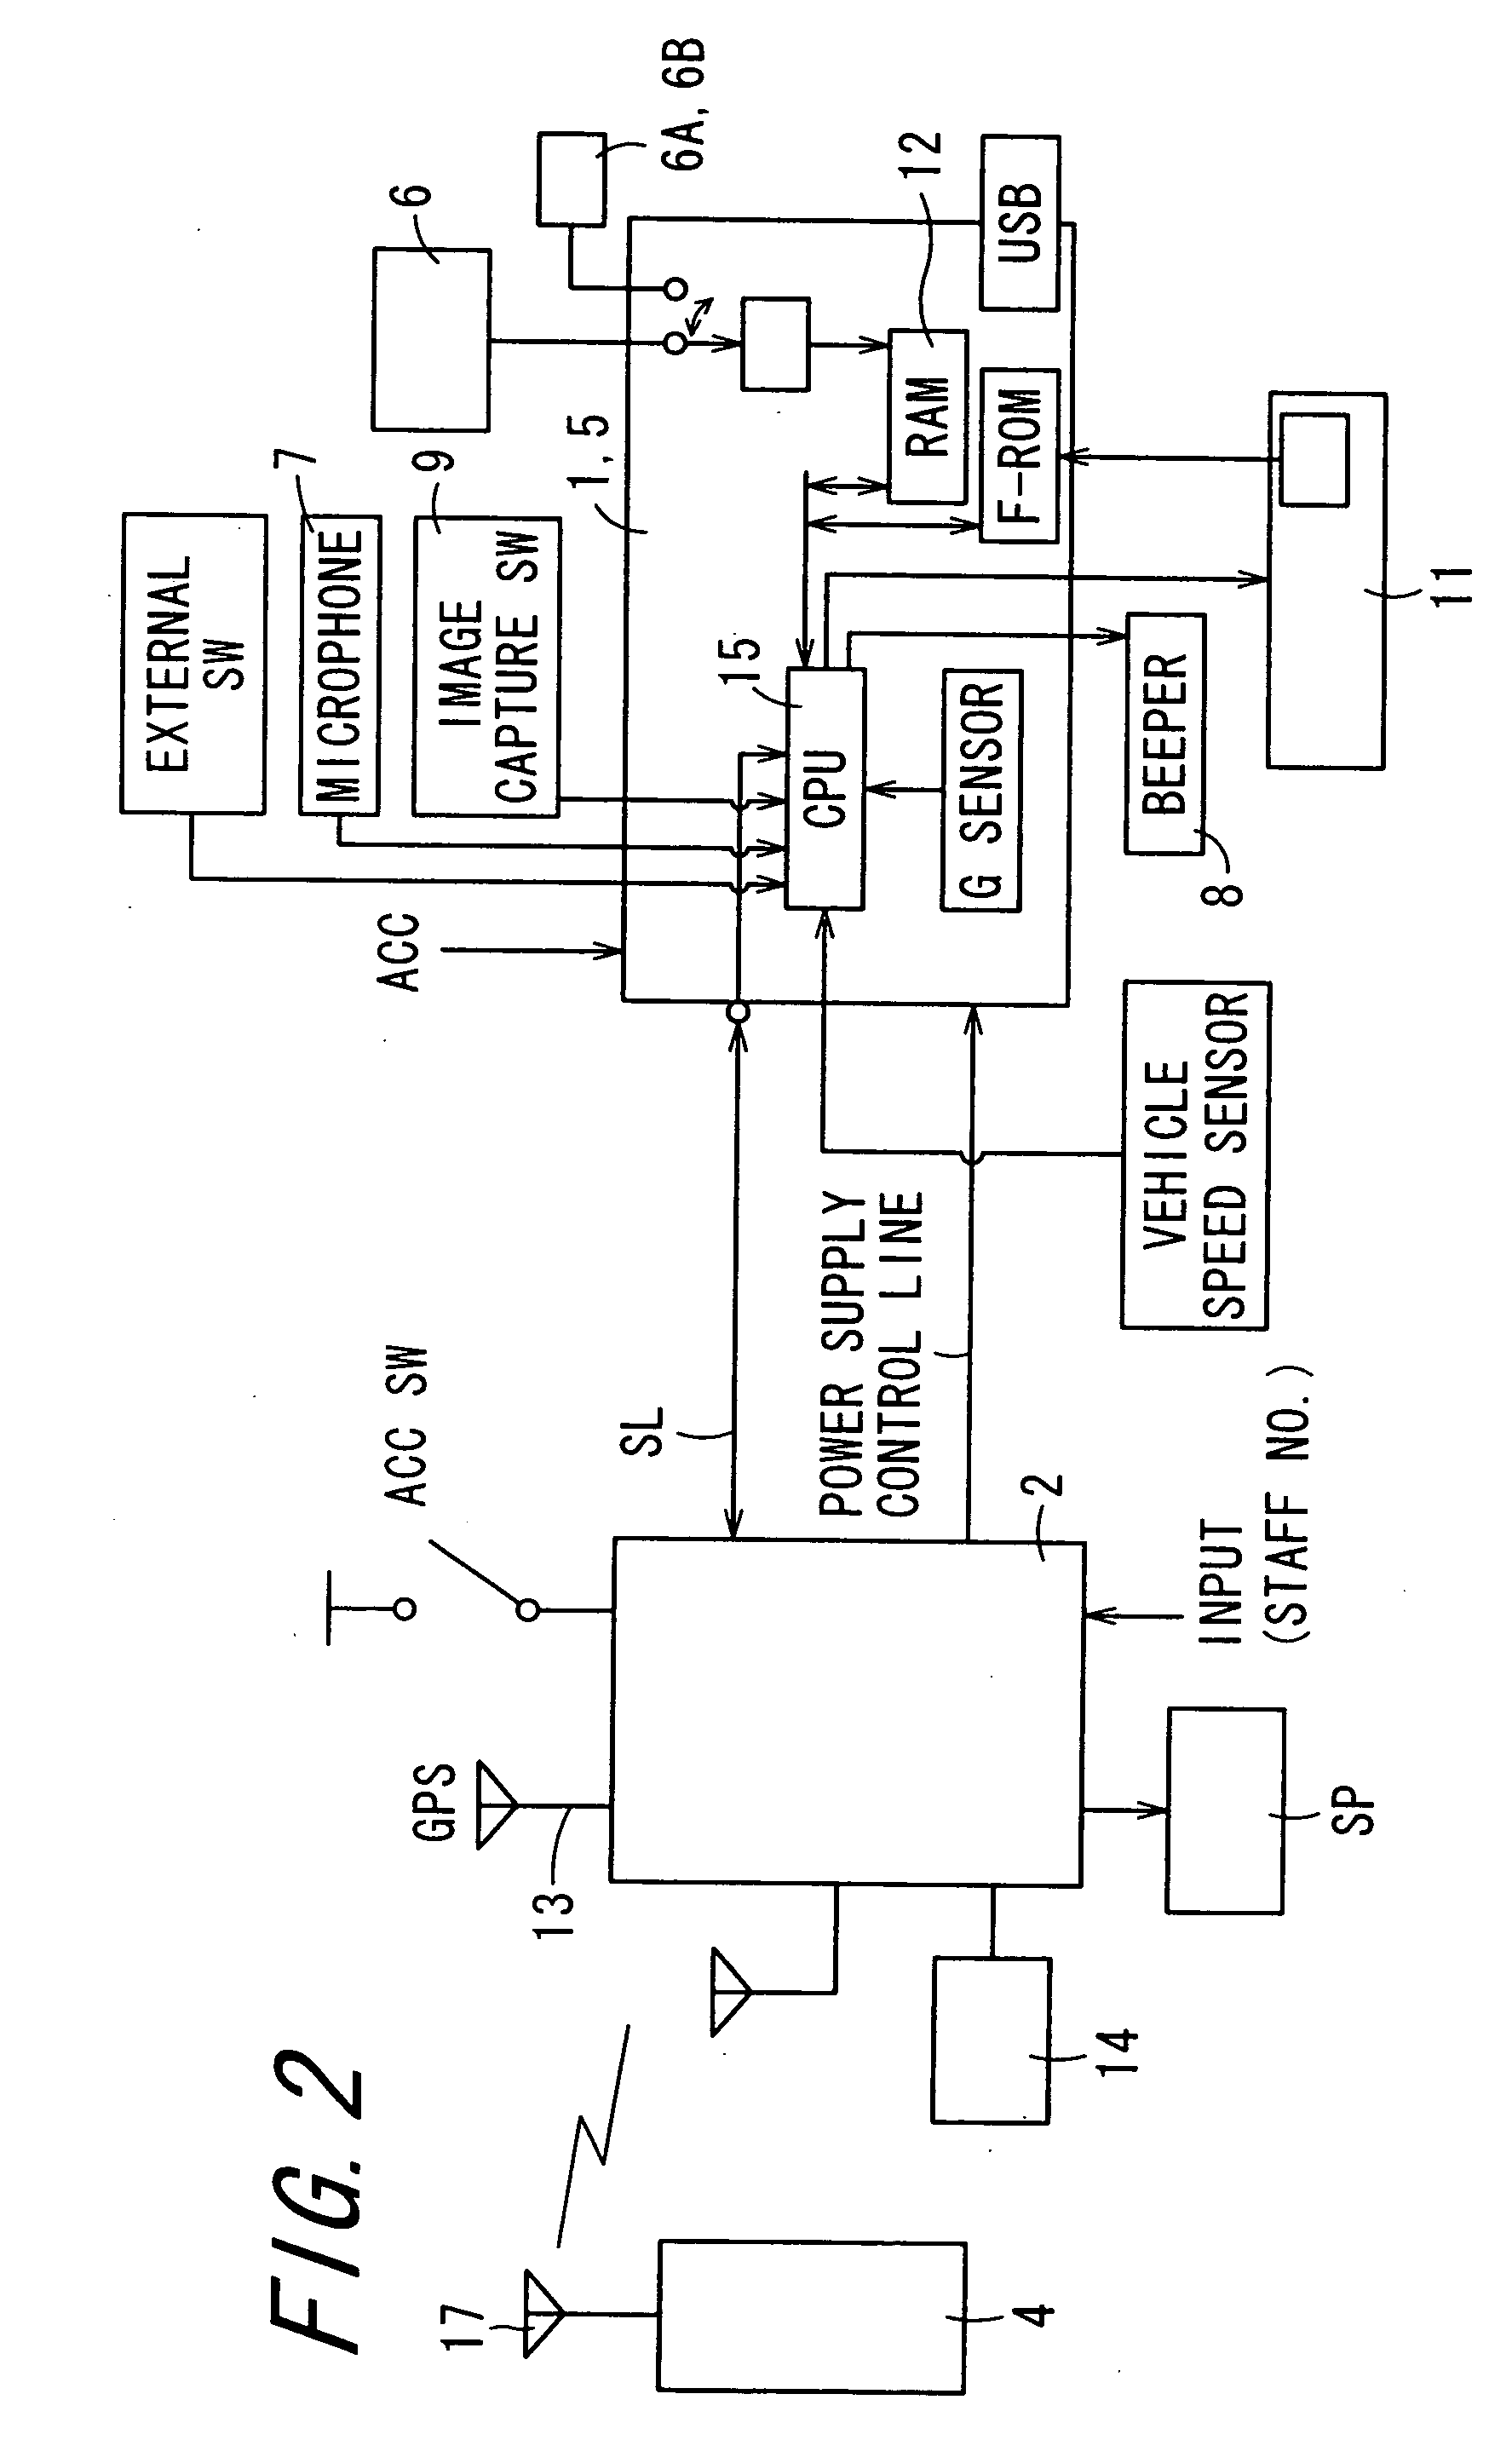 Driving information analysis apparatus and driving information analysis system